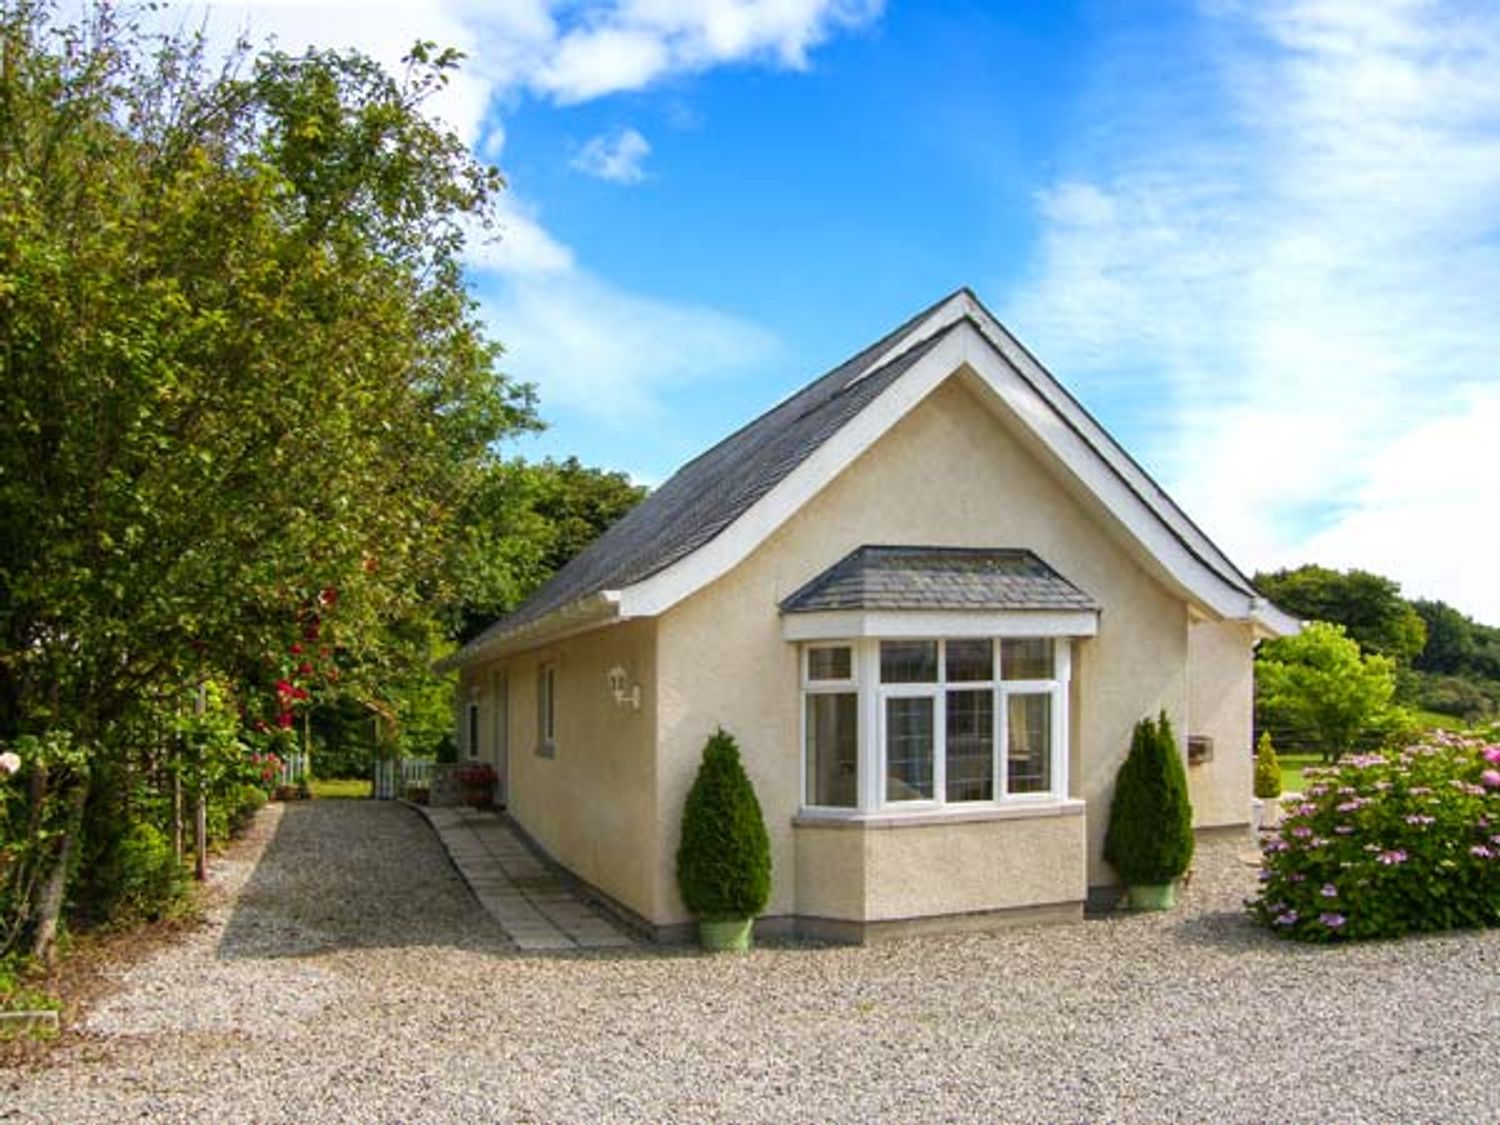 Bedw Arian Cottage - Anglesey - 916021 - photo 1